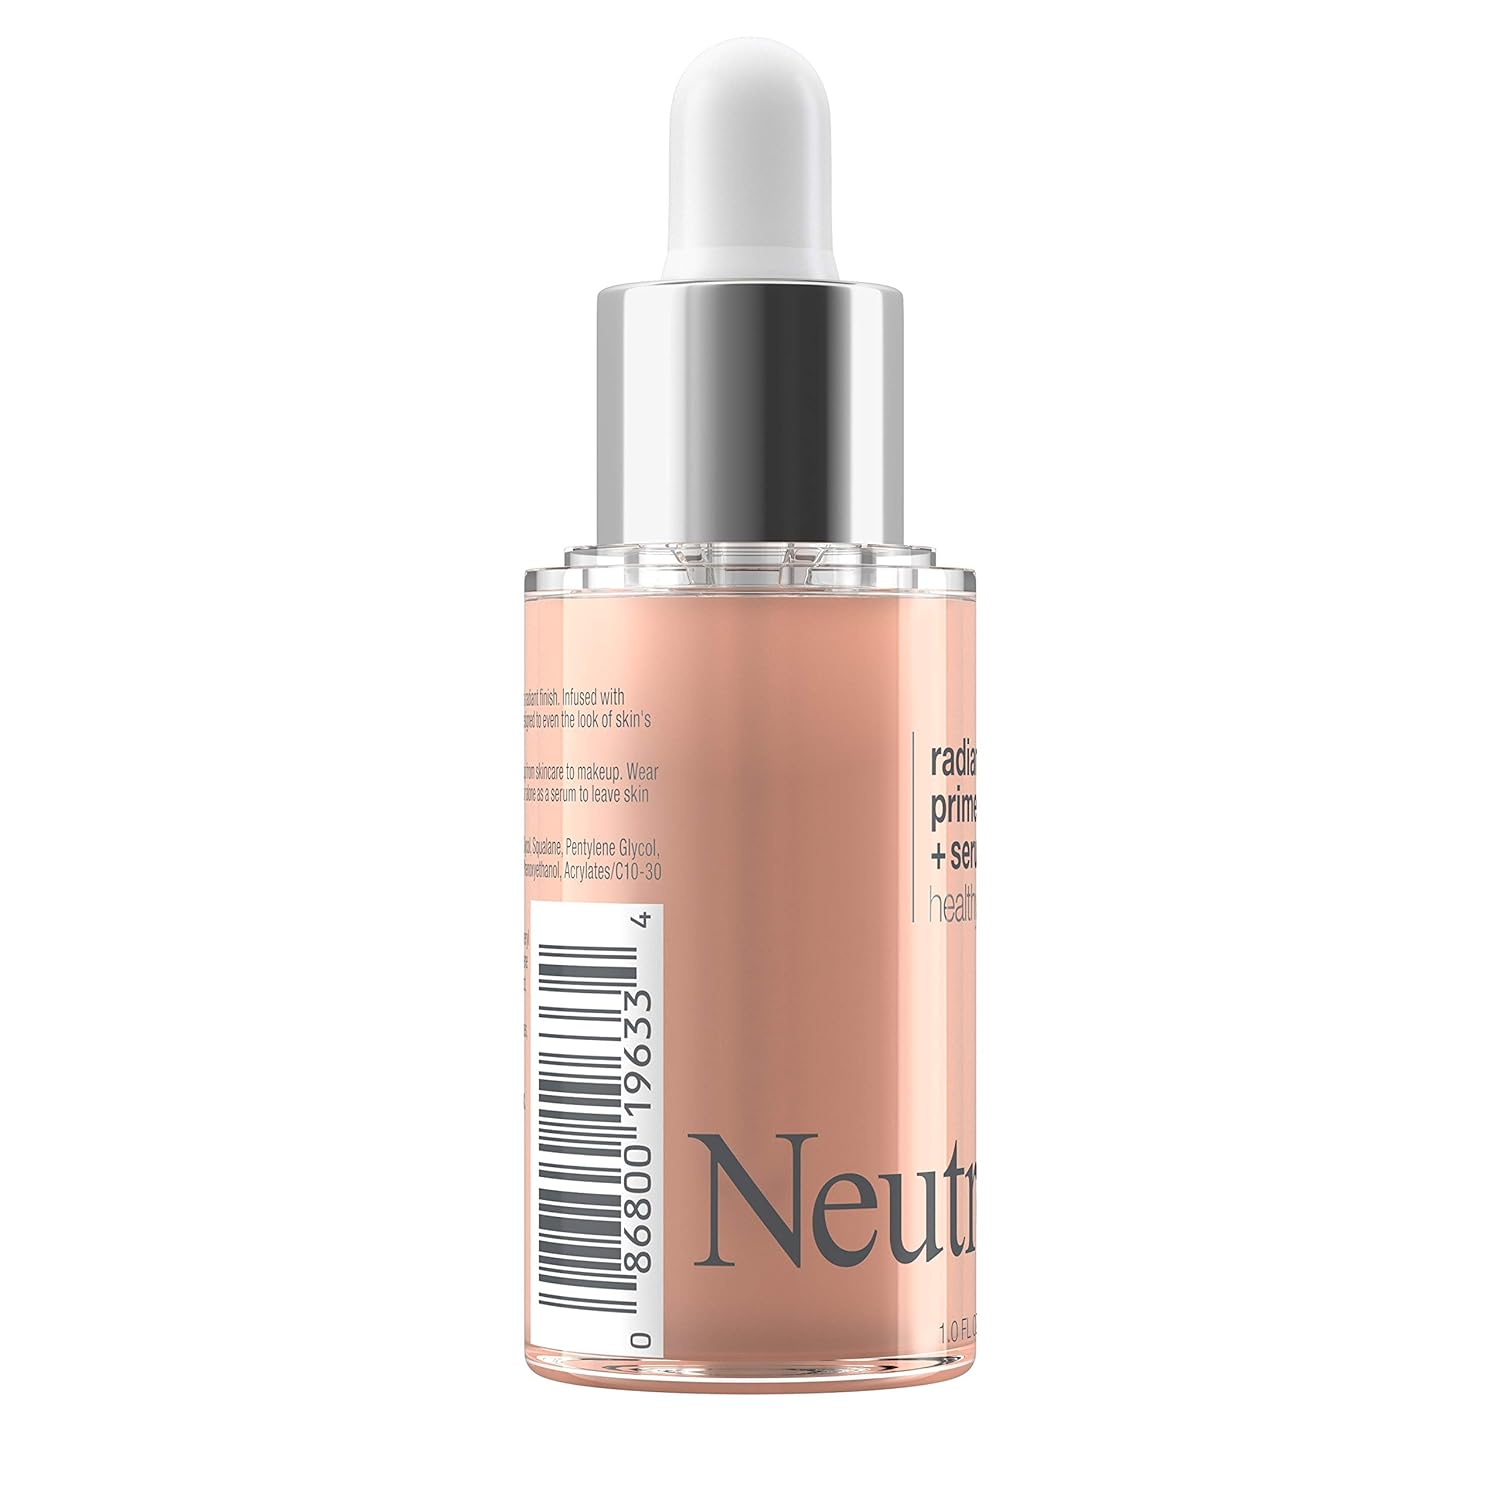  Neutrogena Healthy Skin Radiant Booster Primer & Serum, Skin-Evening Serum-to-Primer with Peptides & Pearl Pigments, Evens the Look of Skins Tone & Smooths Texture, 1.0 fl. oz